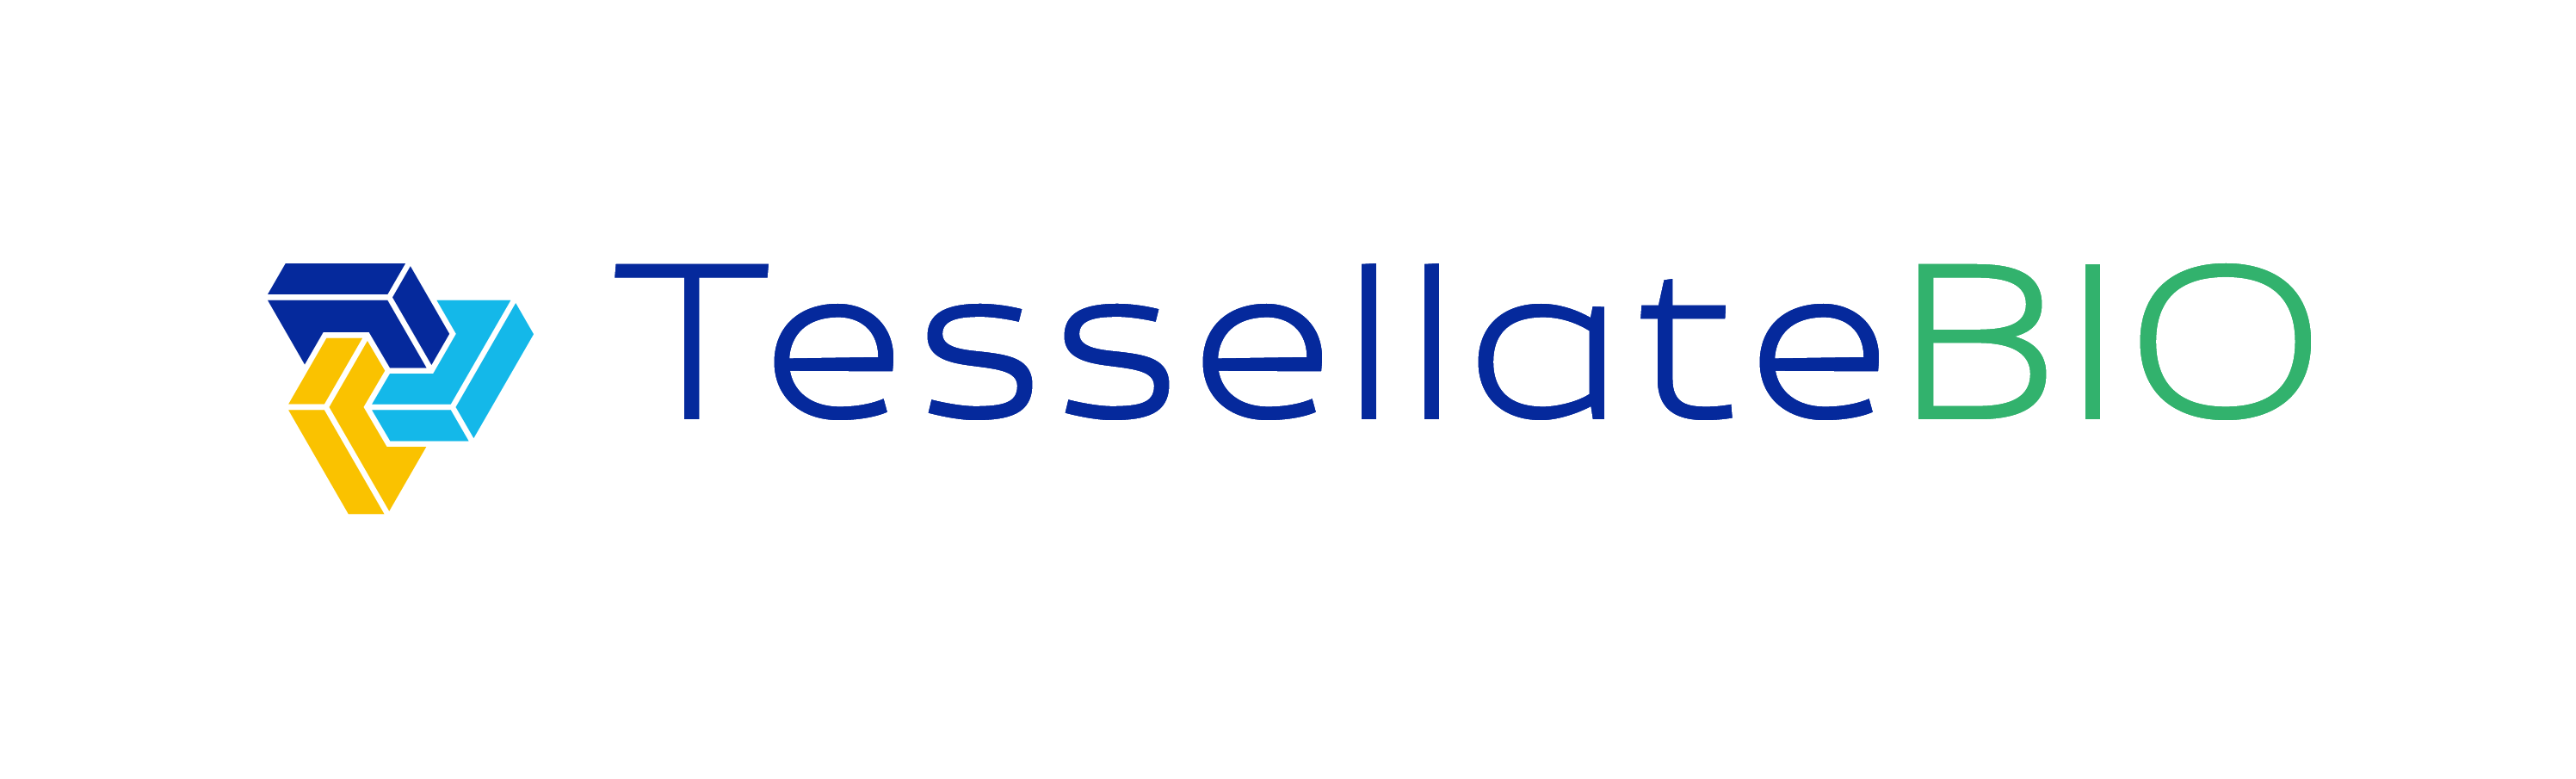 TessellateBio+-+logo+without+brand+promise.png